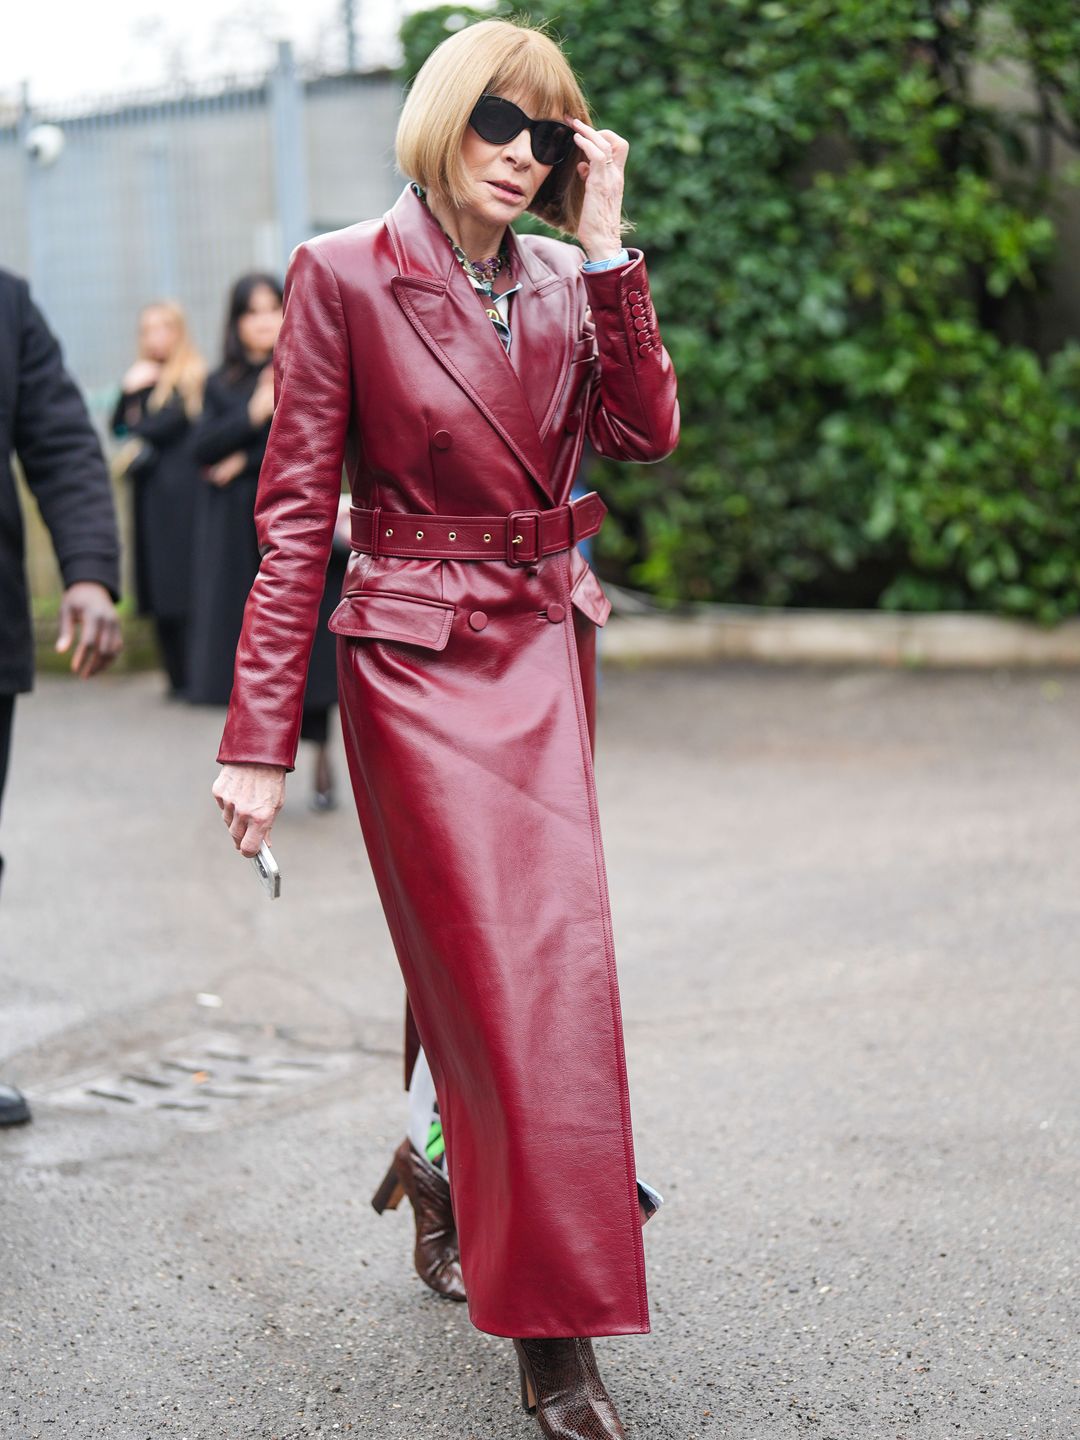 Anna Wintour wears sunglasses, a burgundy leather trench long coat outside Gucci